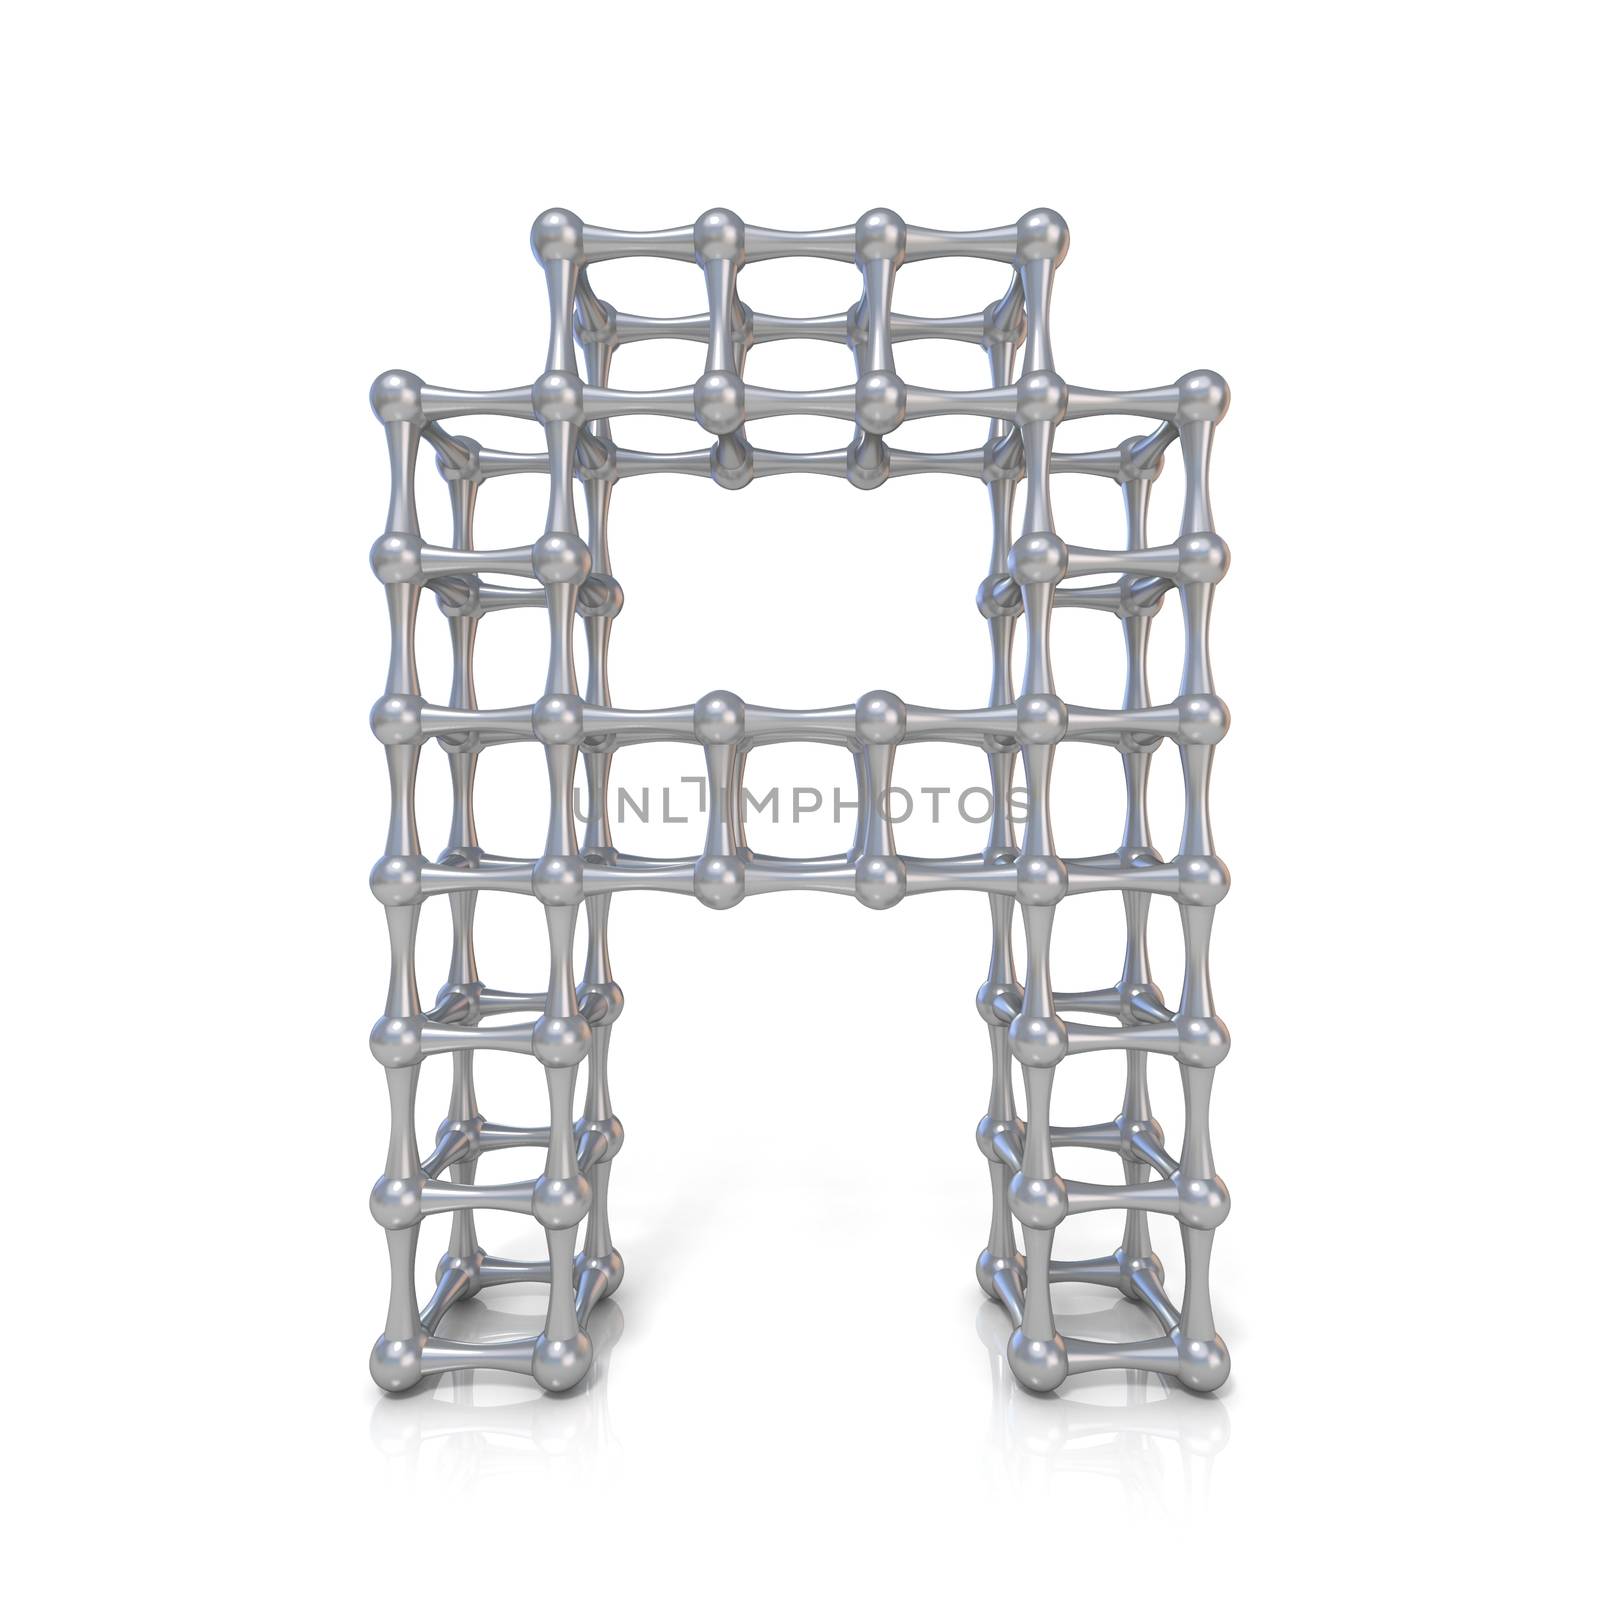 Metal lattice font letter A 3D render illustration isolated on white background